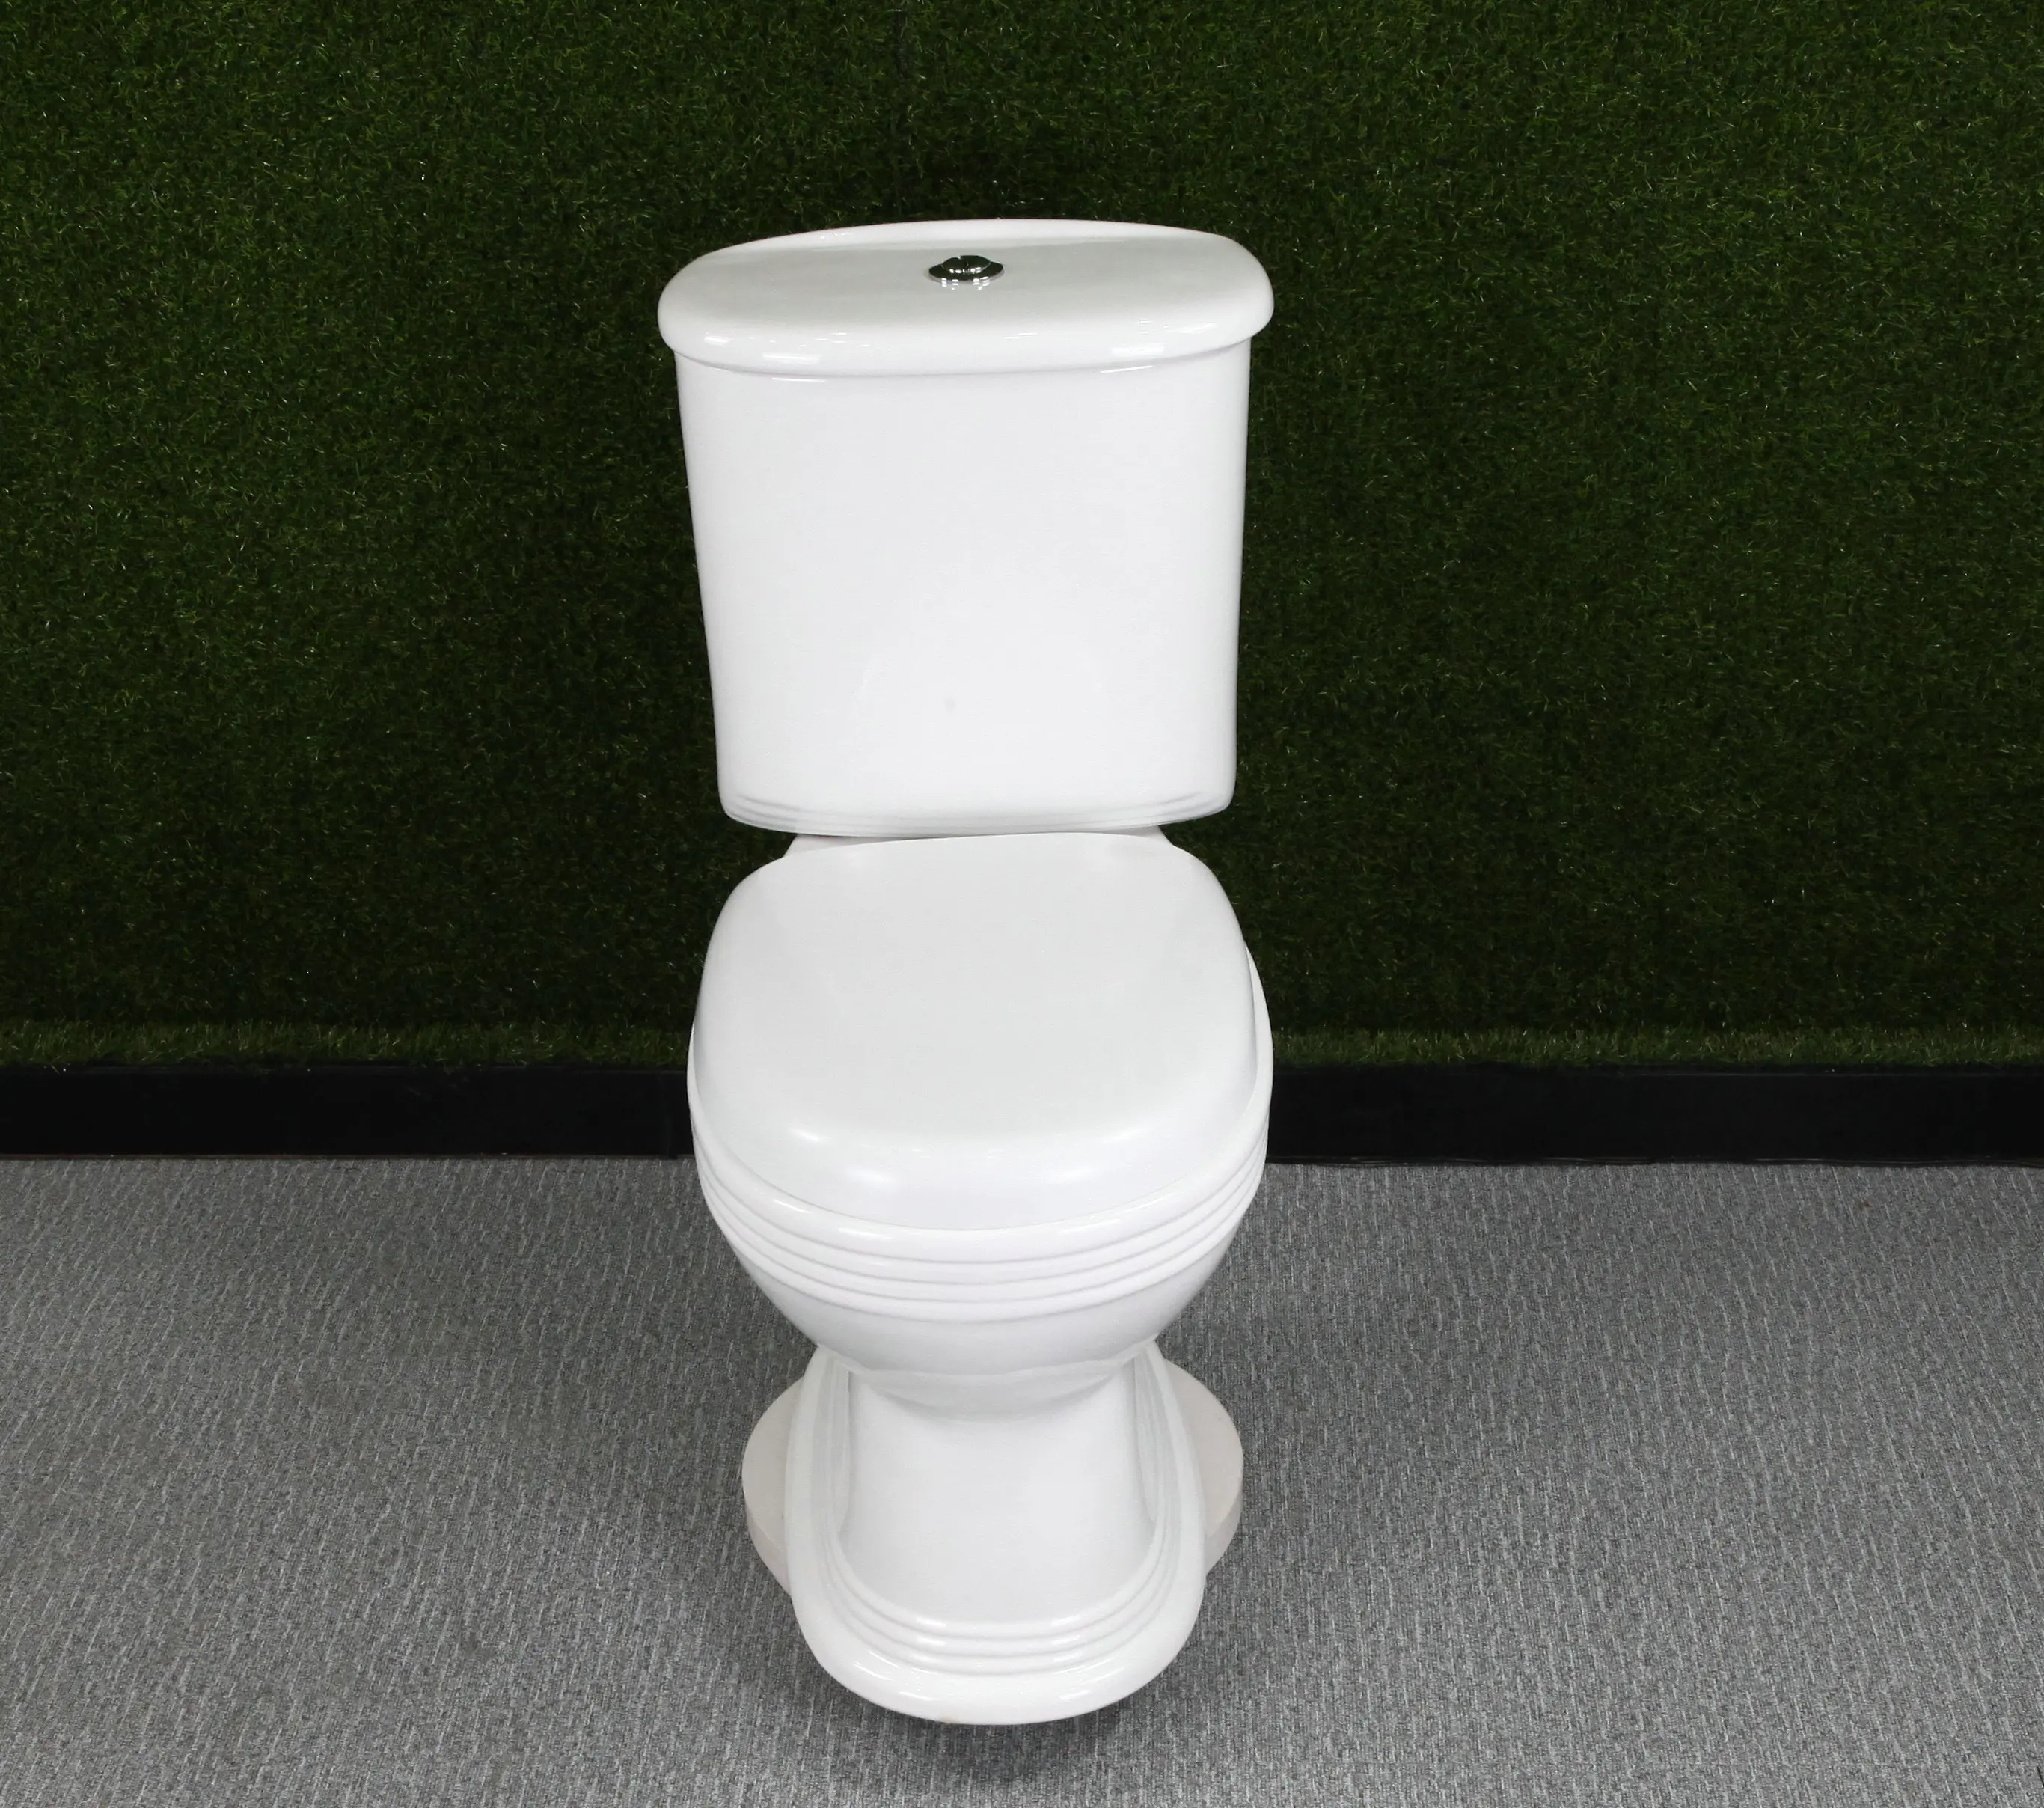 cheap price modern s trap sanitary ware bathroom ceramic one piece sitting wc toilet commode toilet bowl with flush JY2107